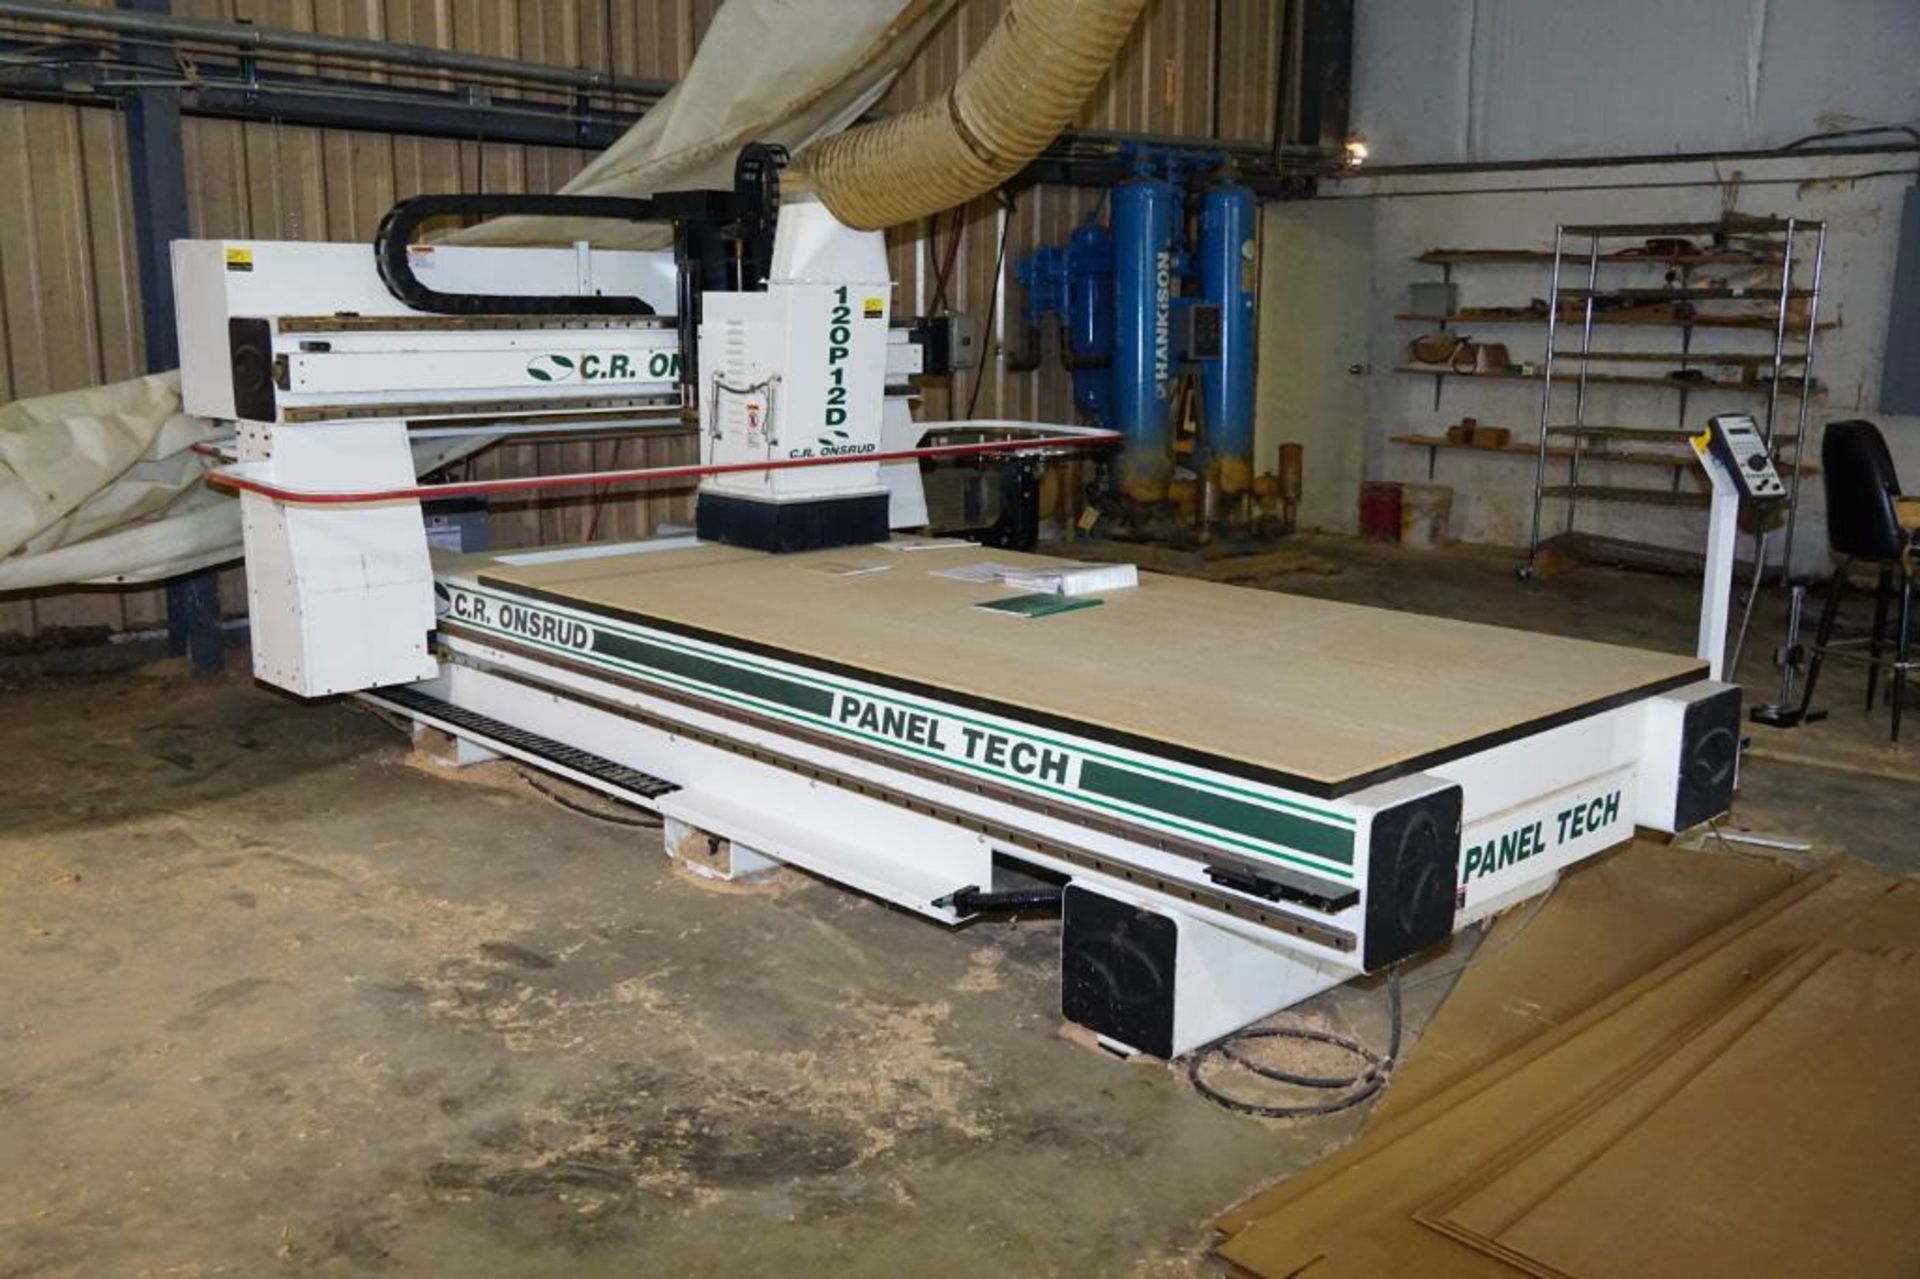 C.R. Onsrud CNC Router